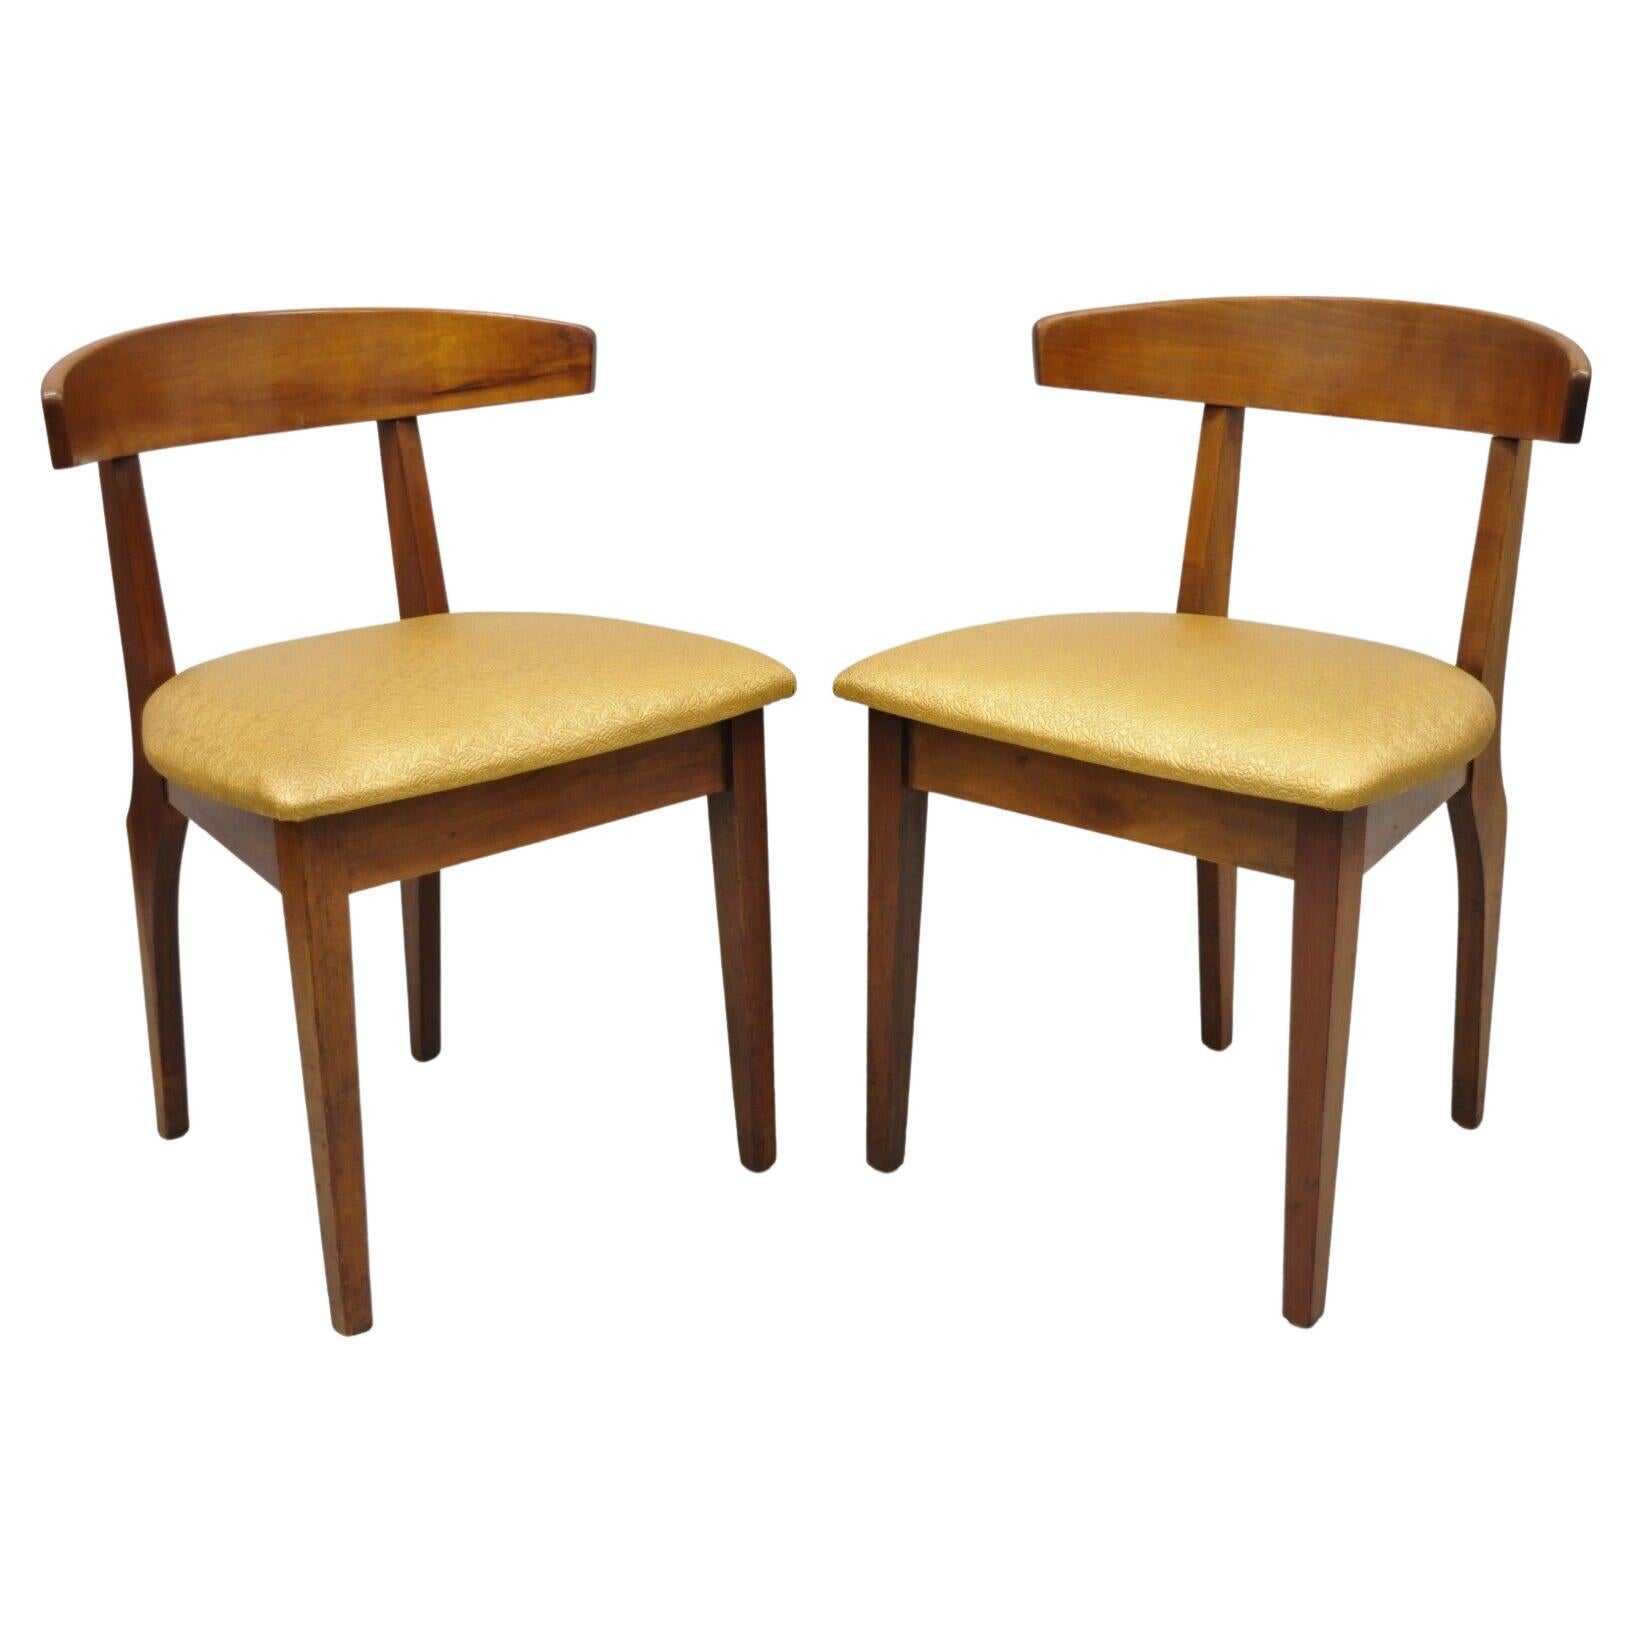 Mid-Century Modern Cherry Wood Curved Back Hoof Leg Side Chair, a Pair For Sale